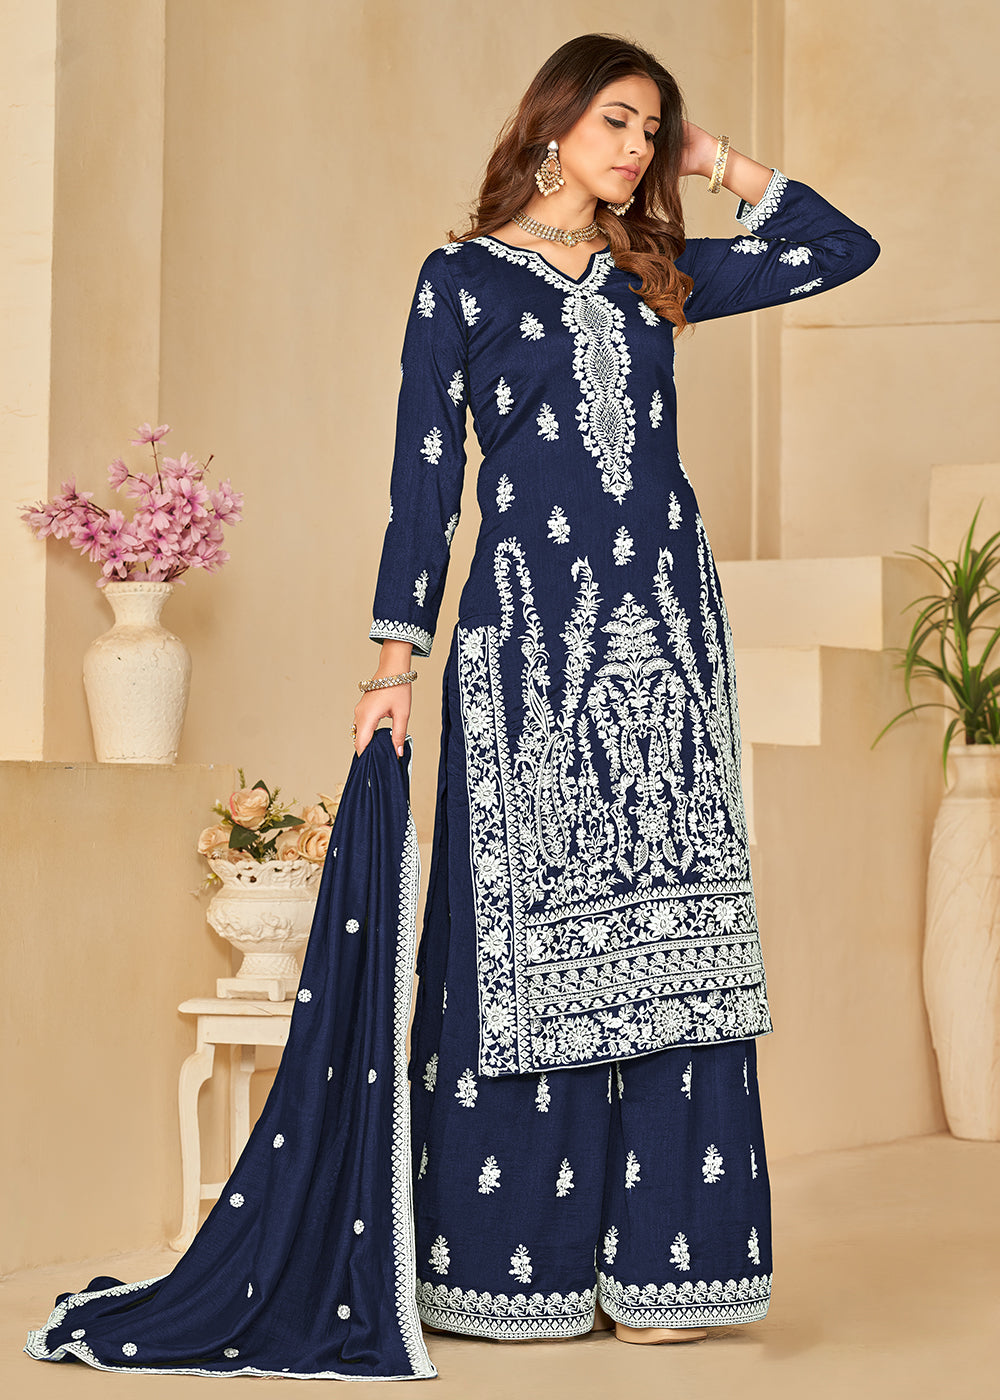 Buy Now Art Silk Pretty Blue Embroidered Palazzo Style Suit Online in USA, UK, Canada, Germany, Australia & Worldwide at Empress Clothing.